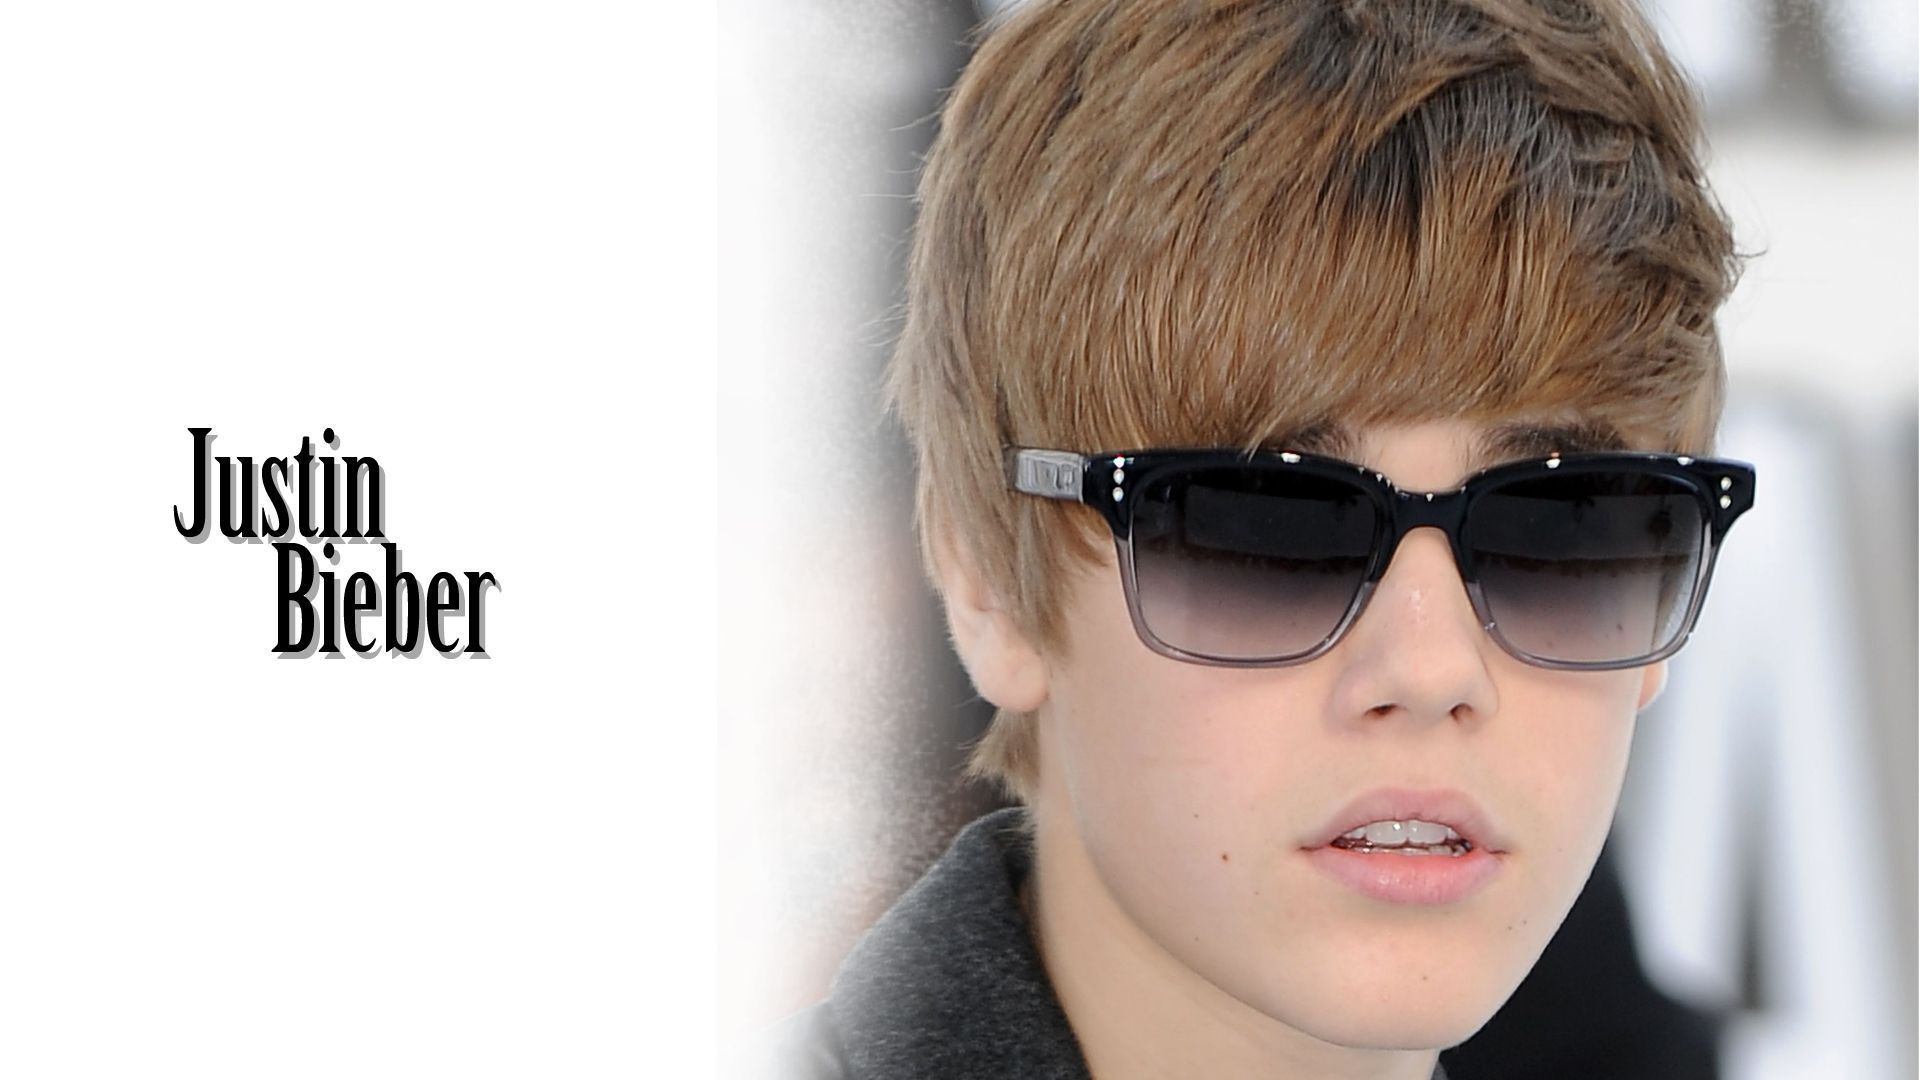 Download Justin Bieber HD Wallpapers 2016 - Stylo Pictures